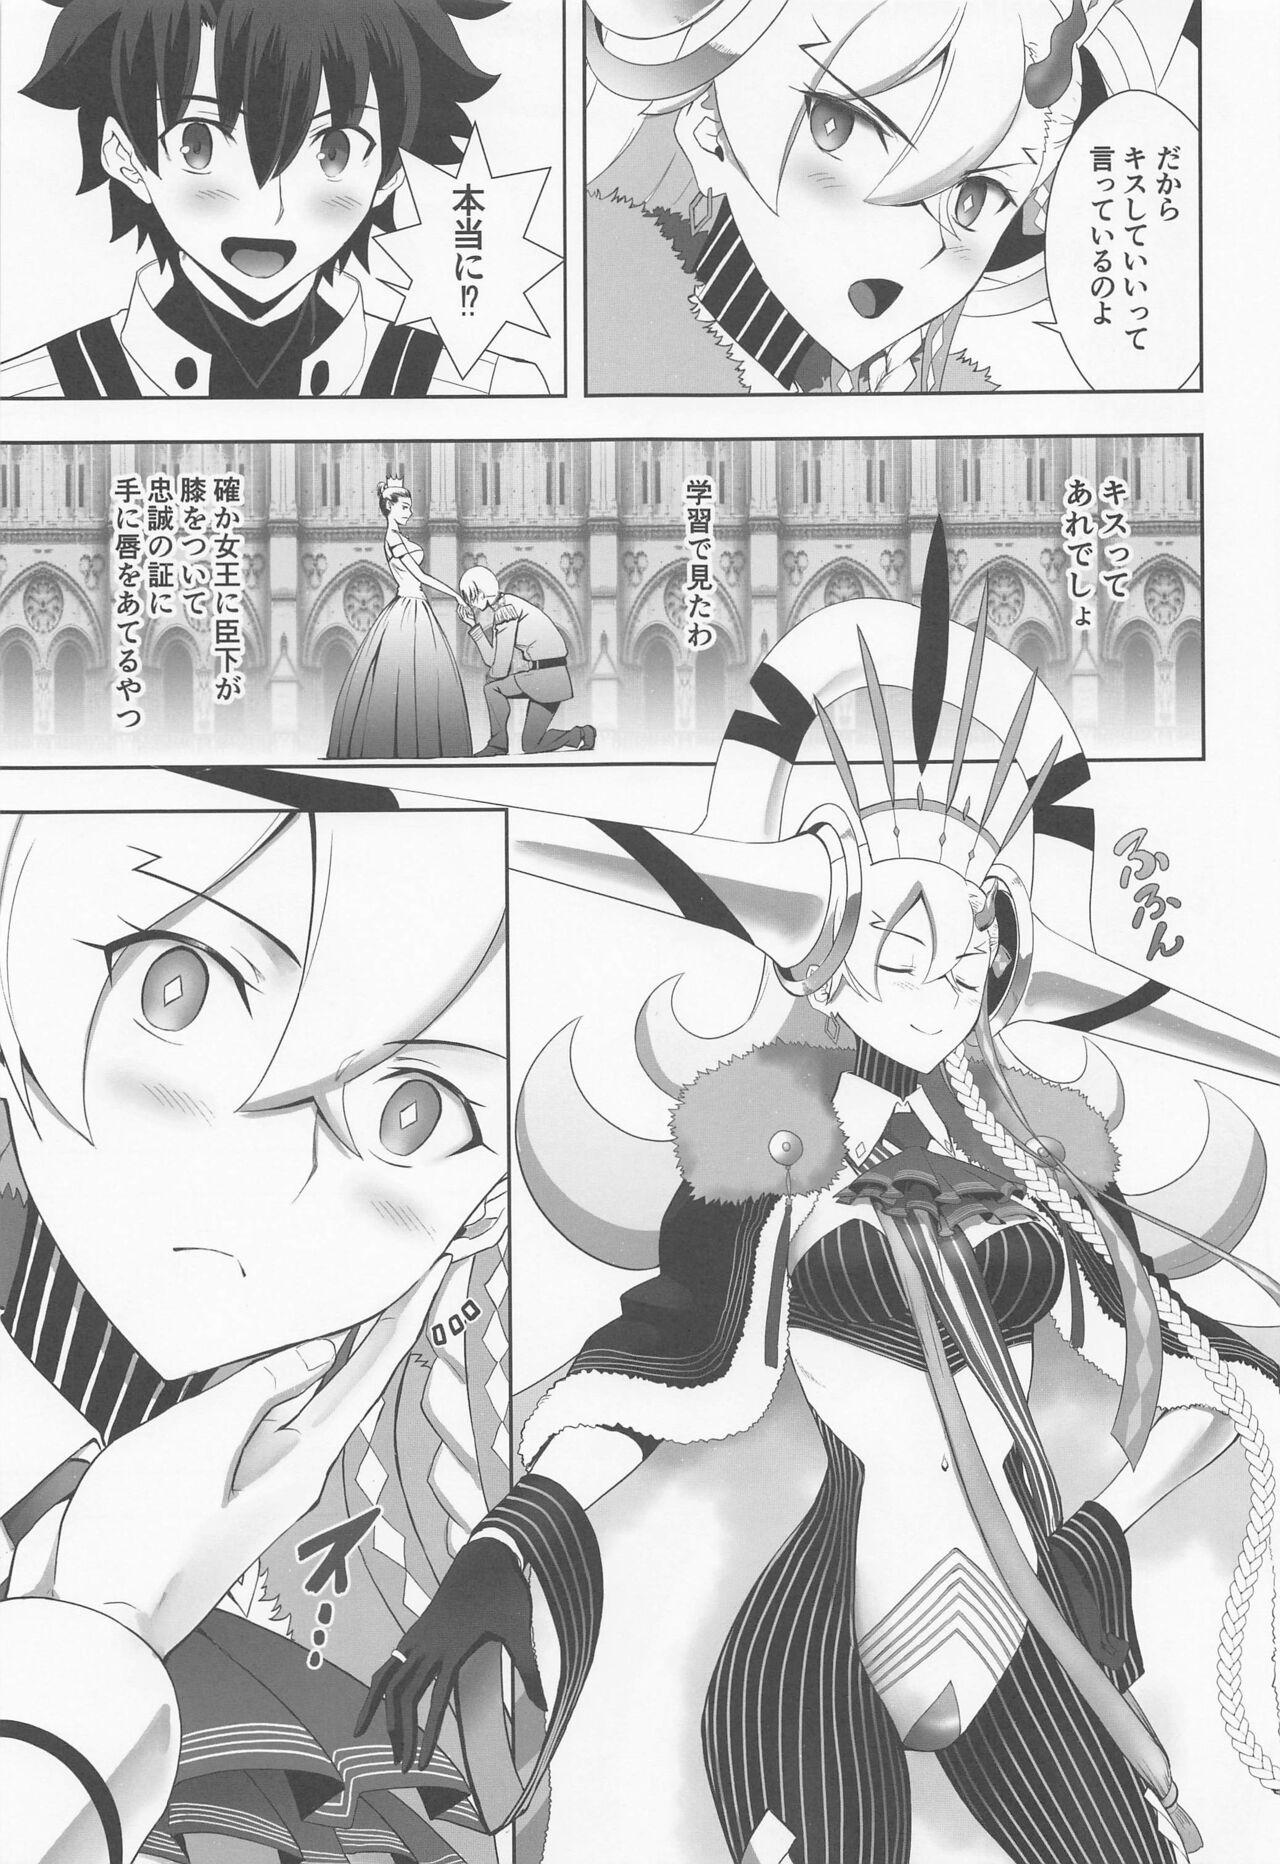 Swallow LOVELY★U - Fate grand order Dom - Page 6